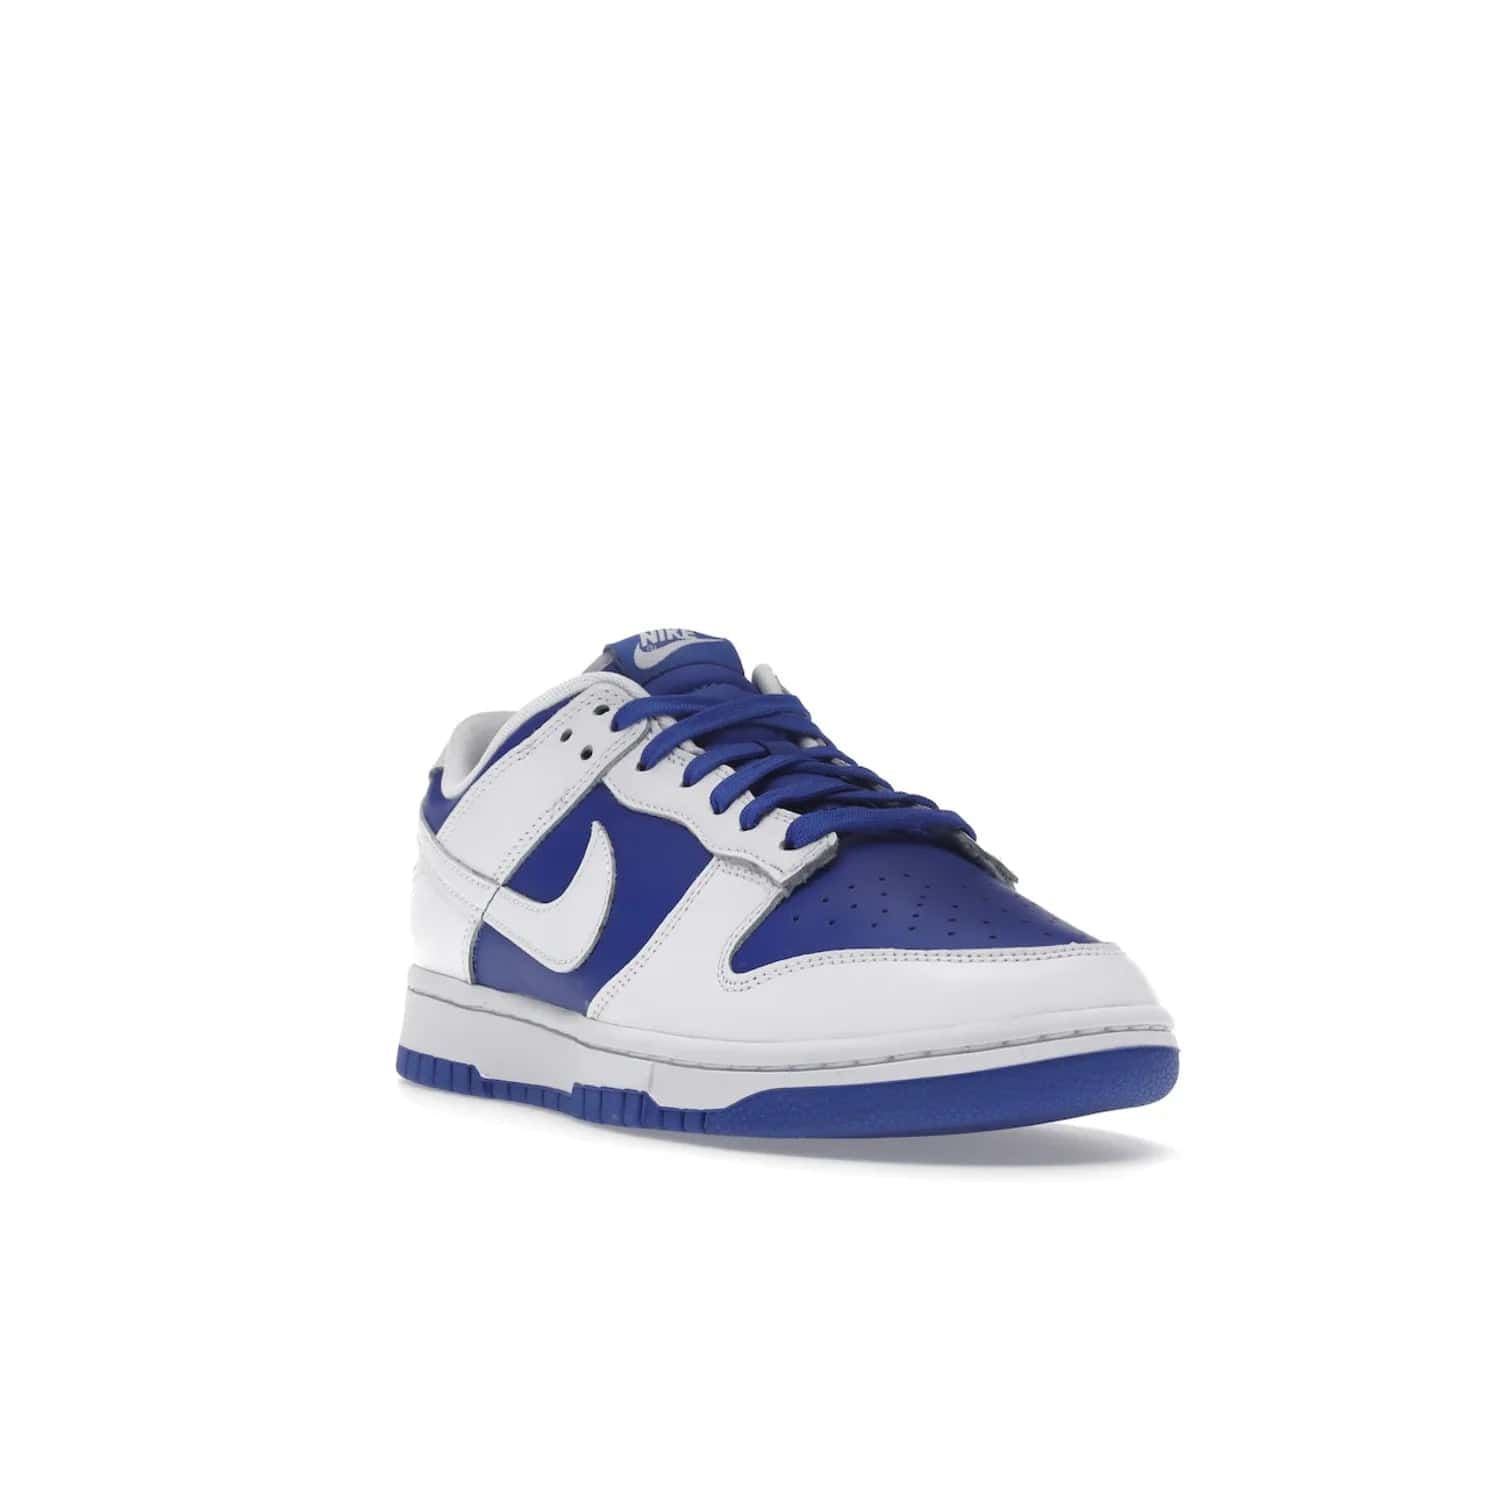 Nike Dunk Low Racer Blue White - Image 7 - Only at www.BallersClubKickz.com - Sleek Racer Blue leather upper and white leather overlays make up the Nike Dunk Low Racer Blue White. Woven tag and heel embroidery for a 1985 Dunk look with a matching EVA foam sole completes the classic colorway.